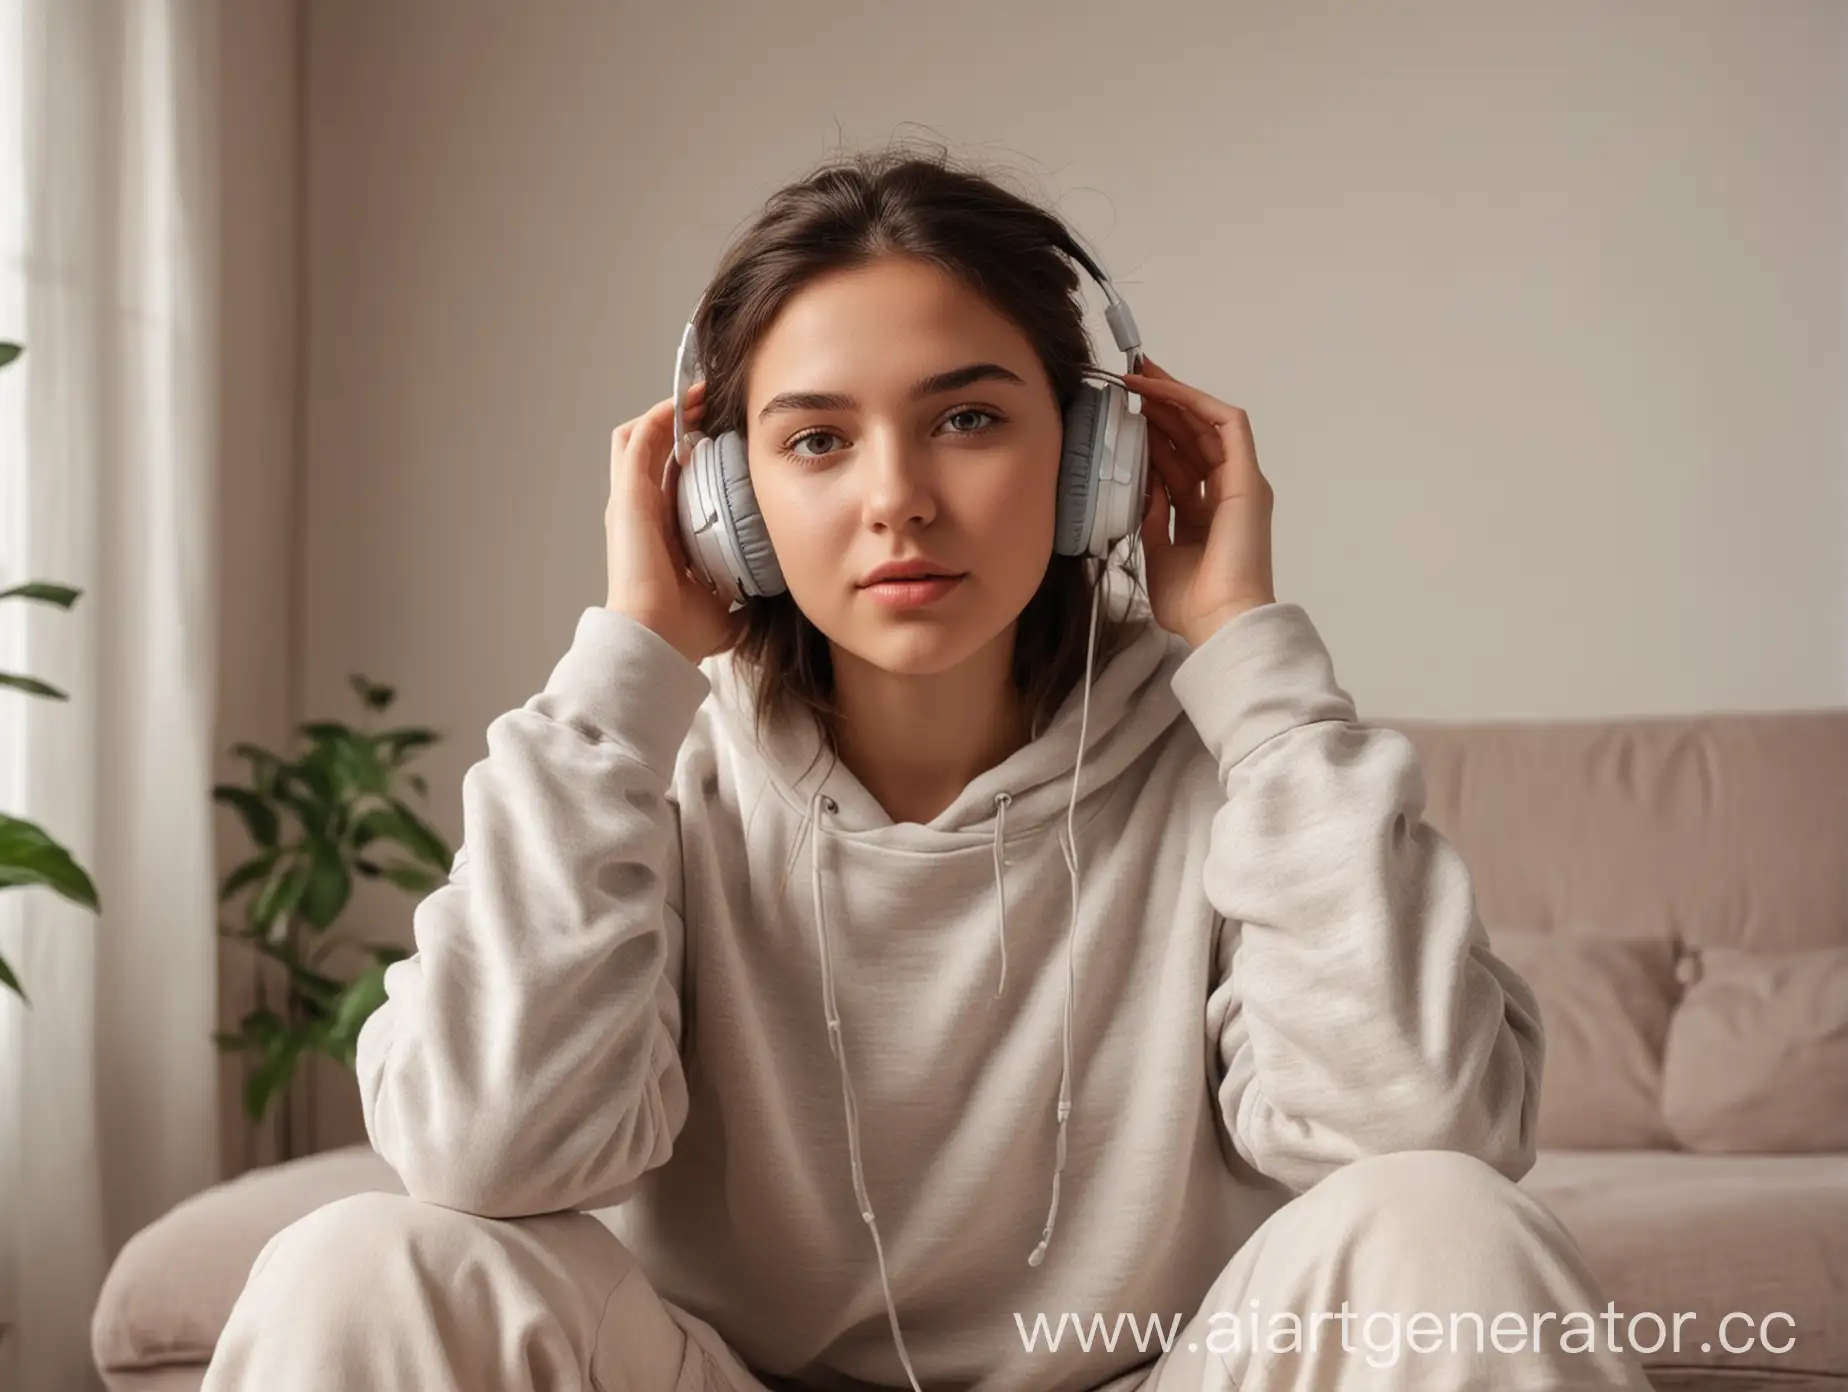 the home apartment is bright against the background, in front of us is a girl who is sitting with headphones on and listening to music. A beautiful young girl dressed in an oversize sweatshirt